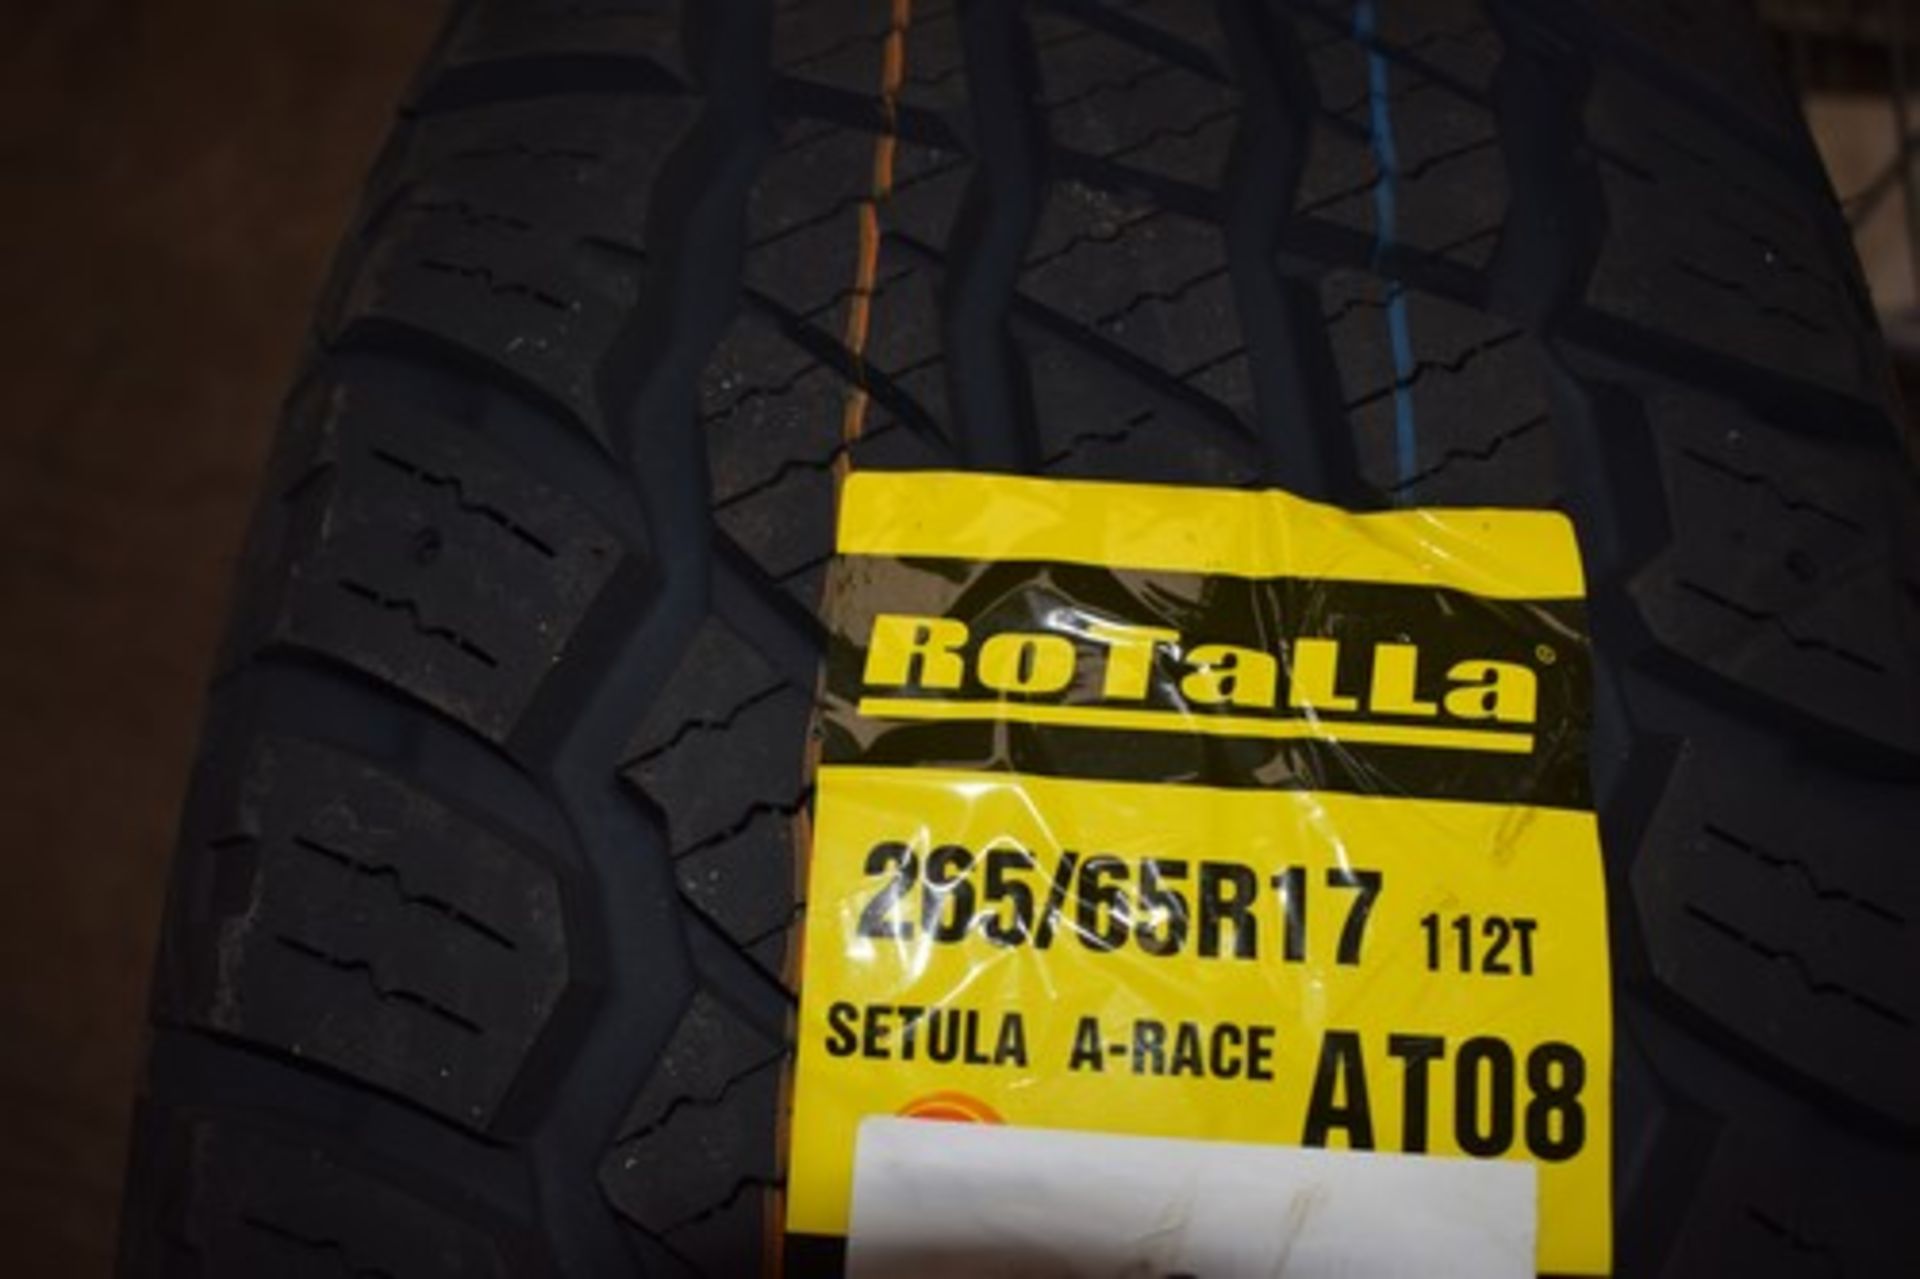 1 x Rotalla Setula A Race AT08 tyre, size 265/65R17 112T - new with label (cage 4)